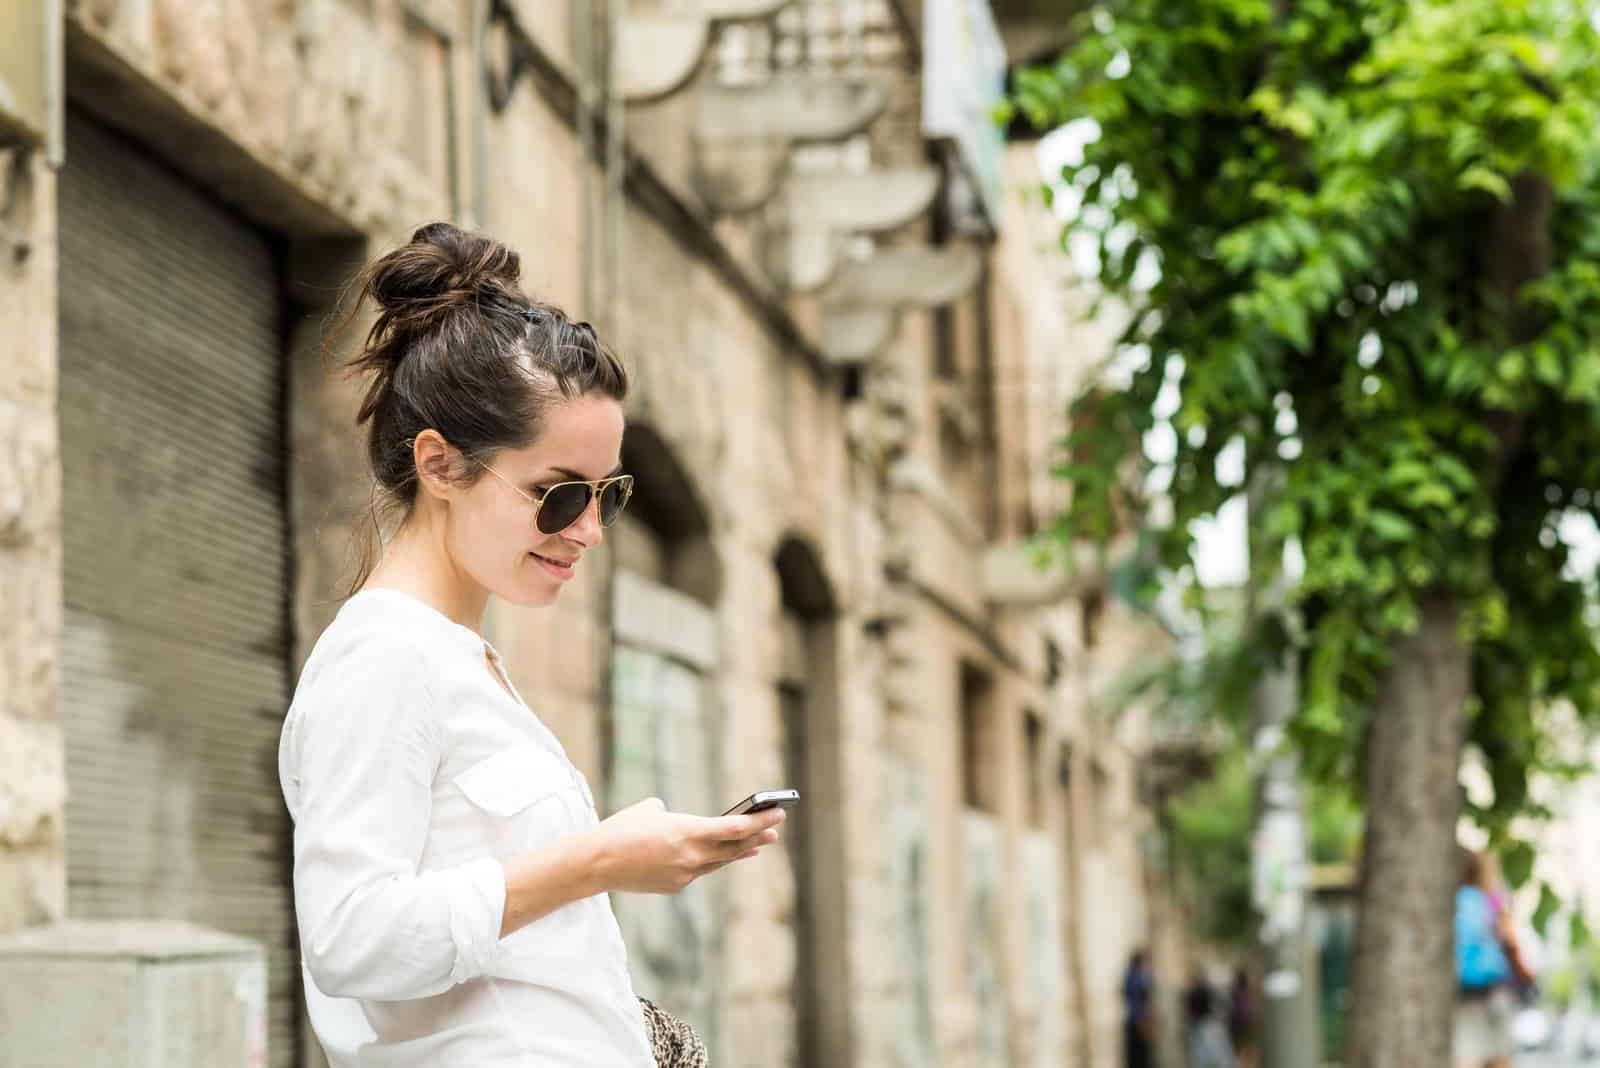 a woman with tied hair stands on the street and a button on the phone